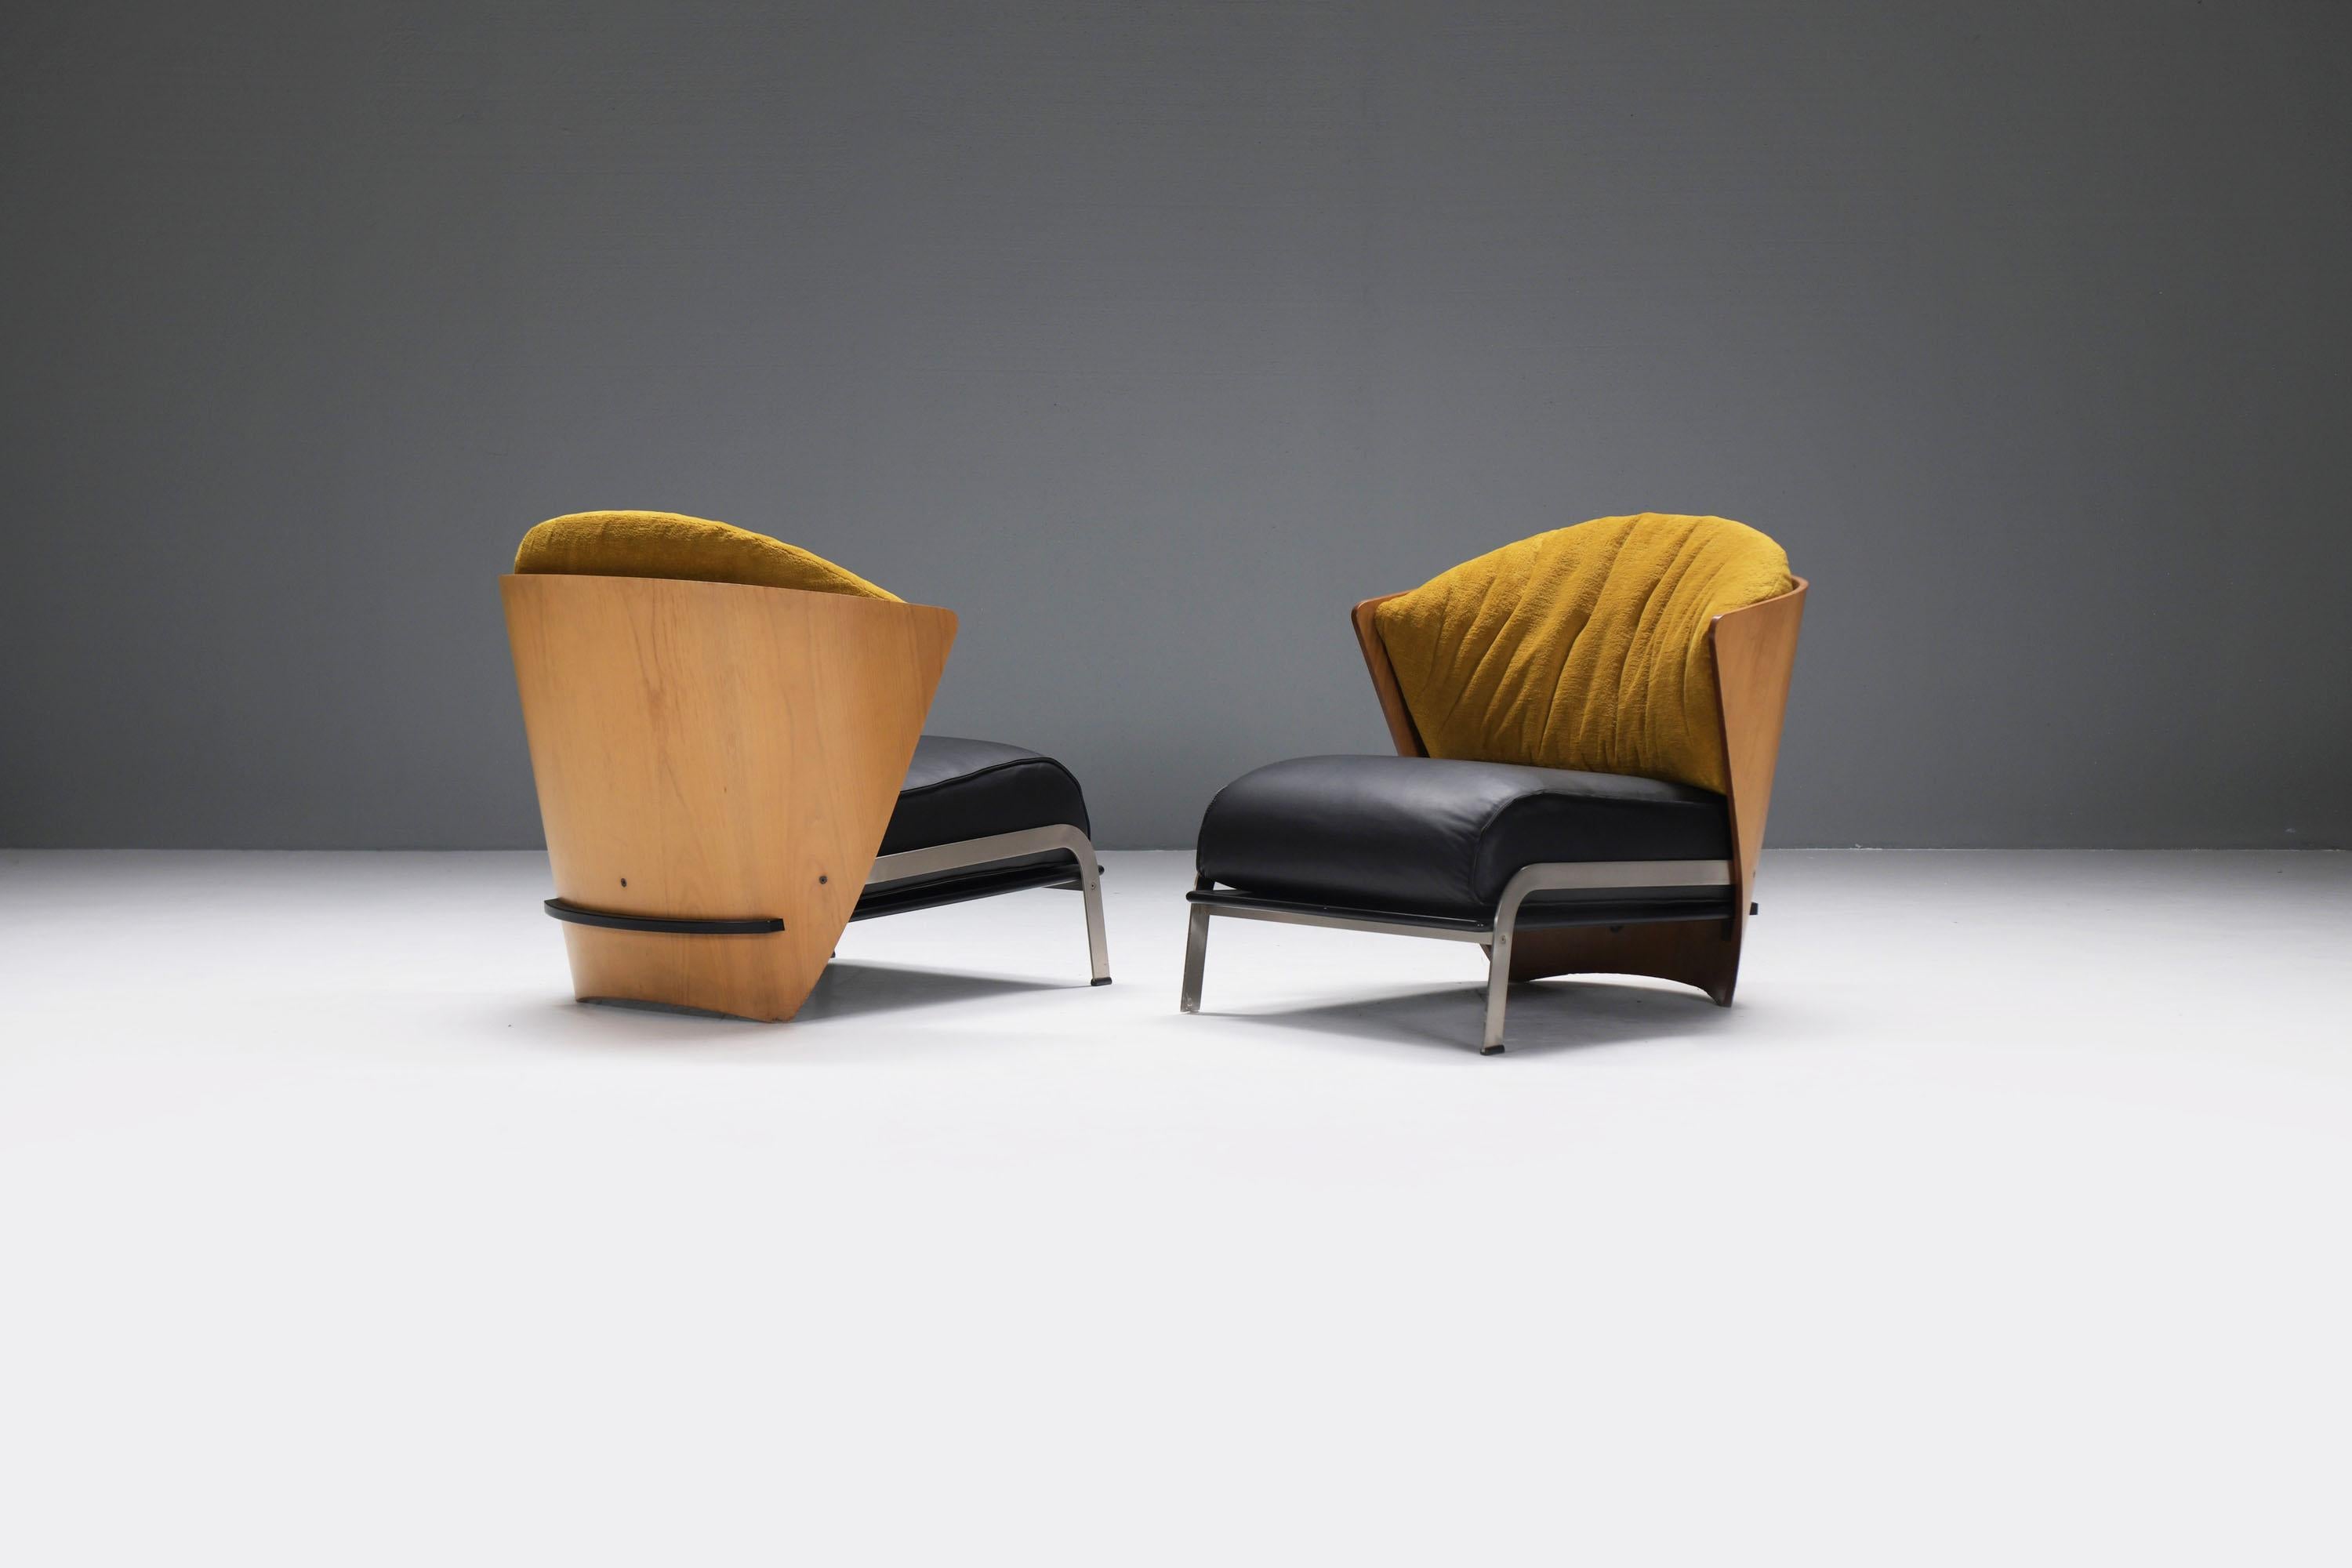 Wonderful, elegant pair of Elba chairs with new leather & fabric.
Designed by Franco Raggi for Cappellini Italy in 1983.

Designed in 1983 and produced in the 1980s through the late 1990's.  Beautiful elegant lines with leather seats and fabric